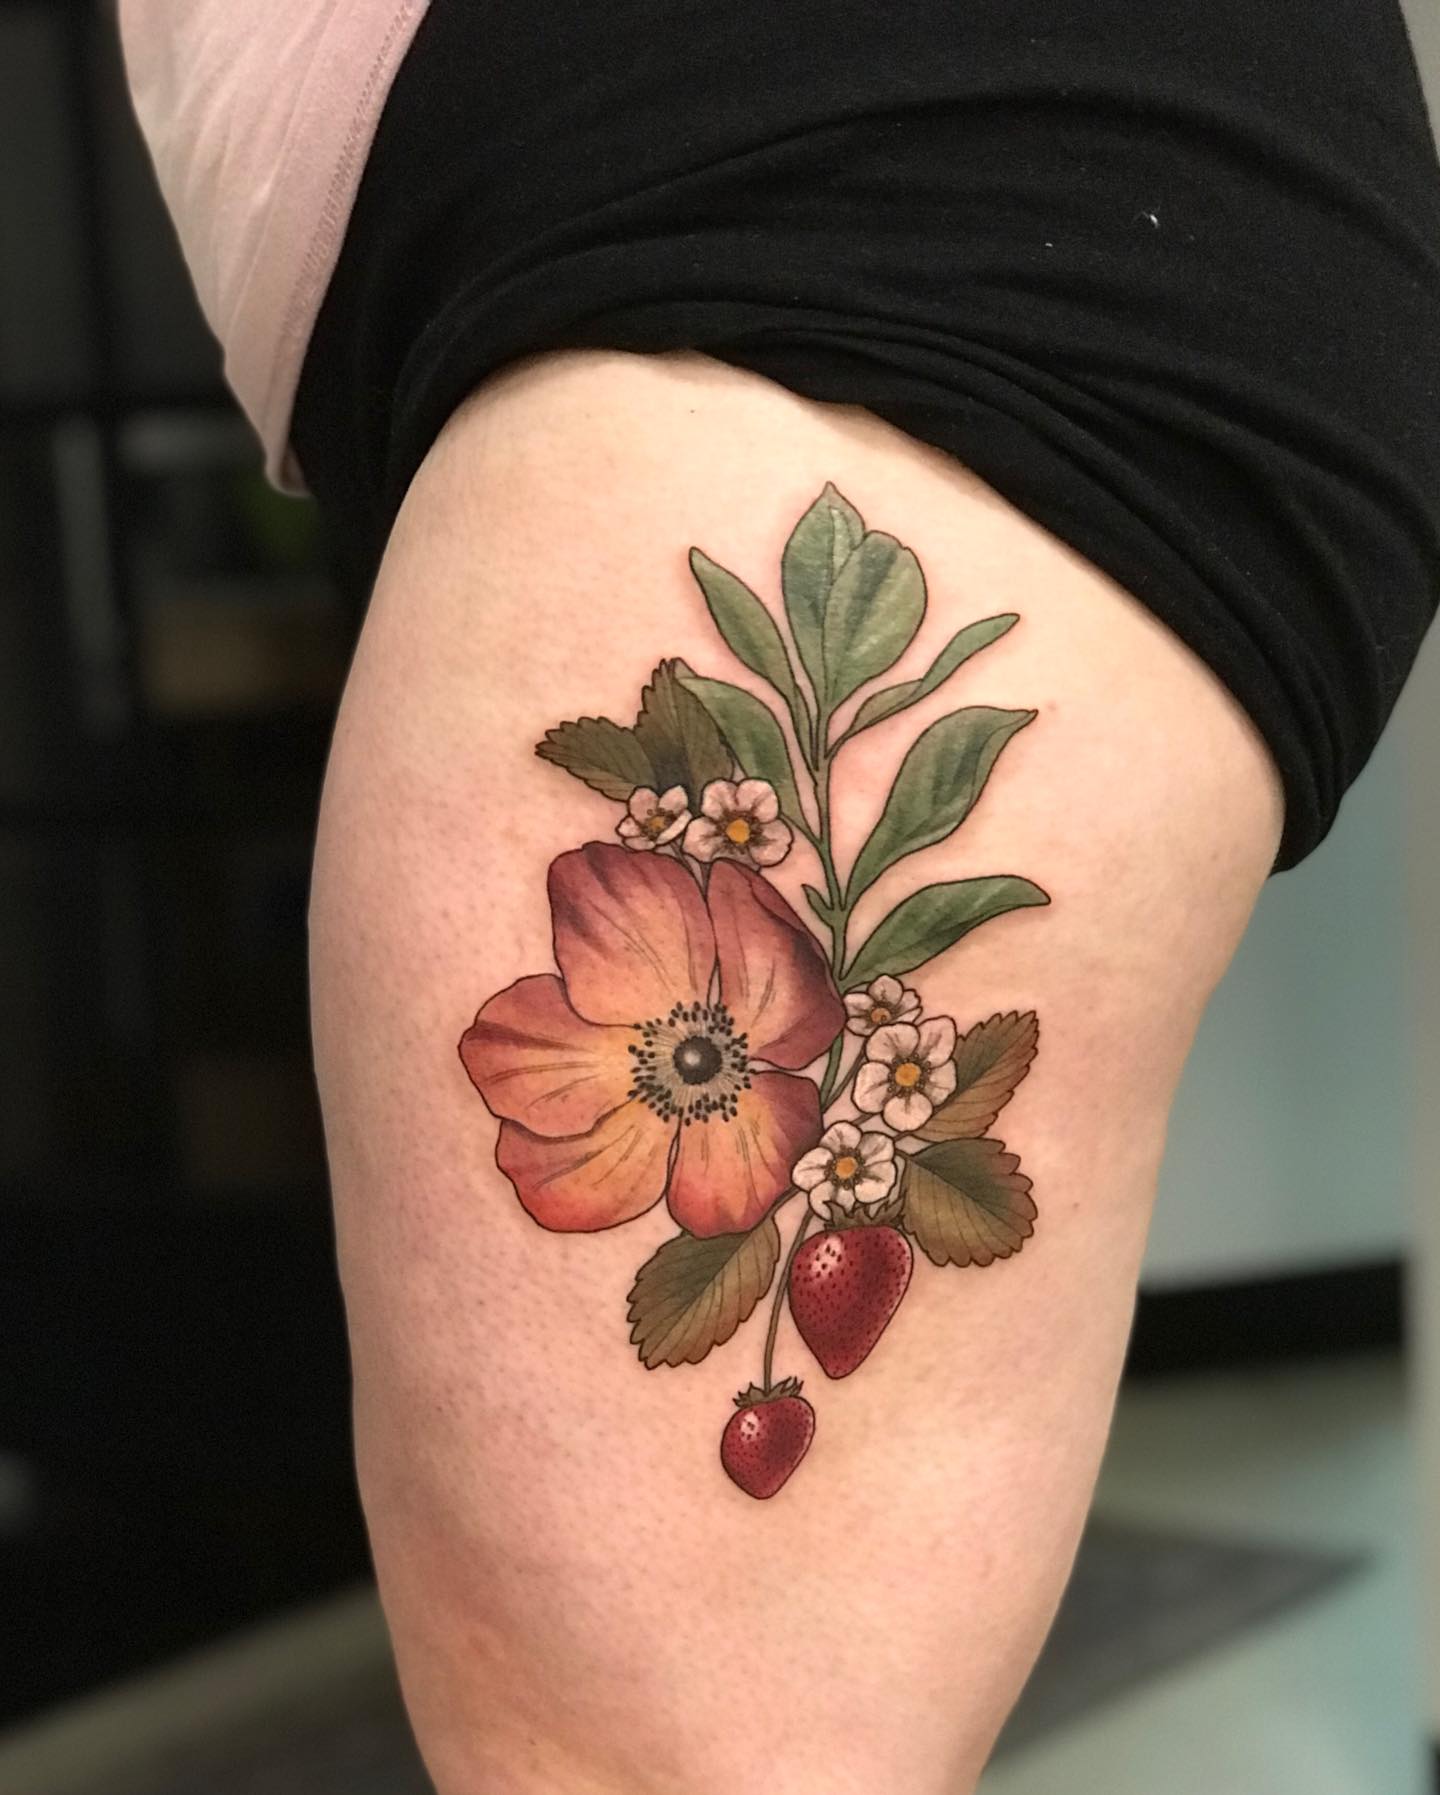 floral tattoo on thigh by daughterofmars.tattoos